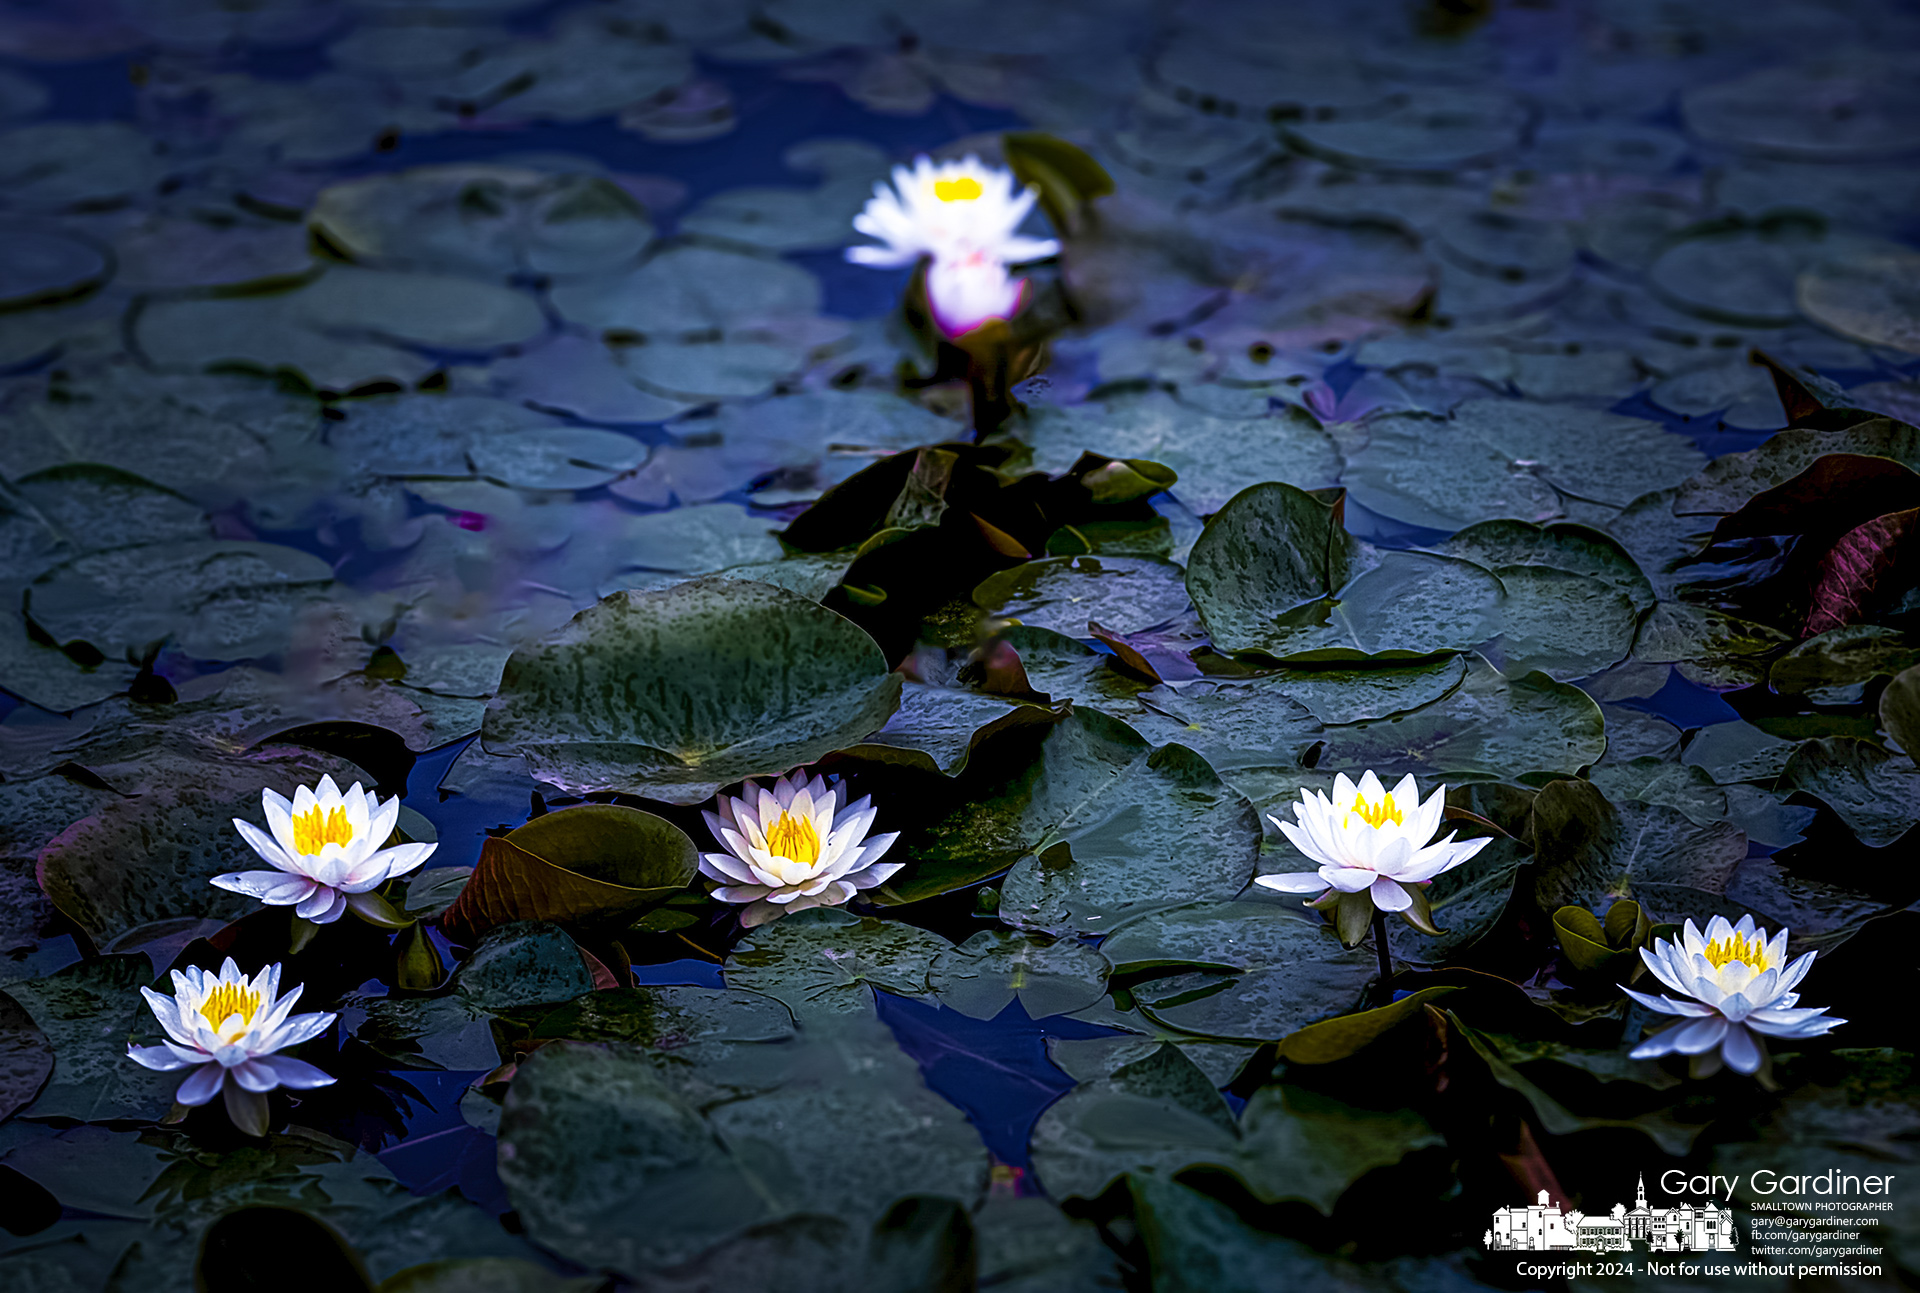 Warm weather brings the first showing of water lilies in the wetland at Highlands Park. My Final Photo for May 6, 2024.